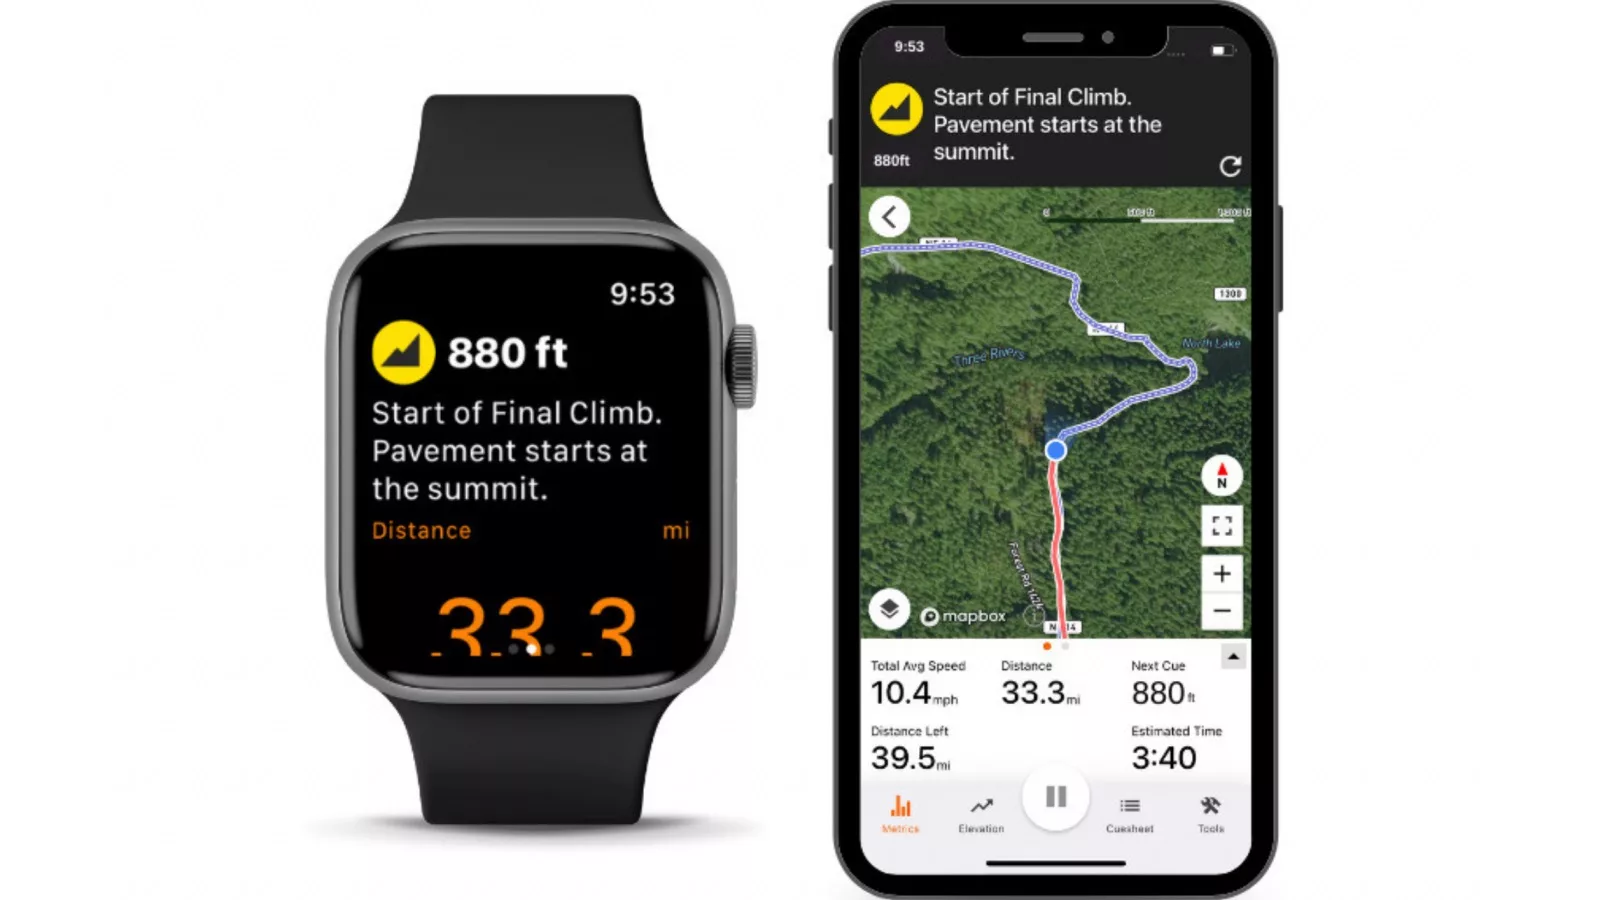 Ride GPS delivers turn-by-turn directions right on your Apple watch - Bikerumor